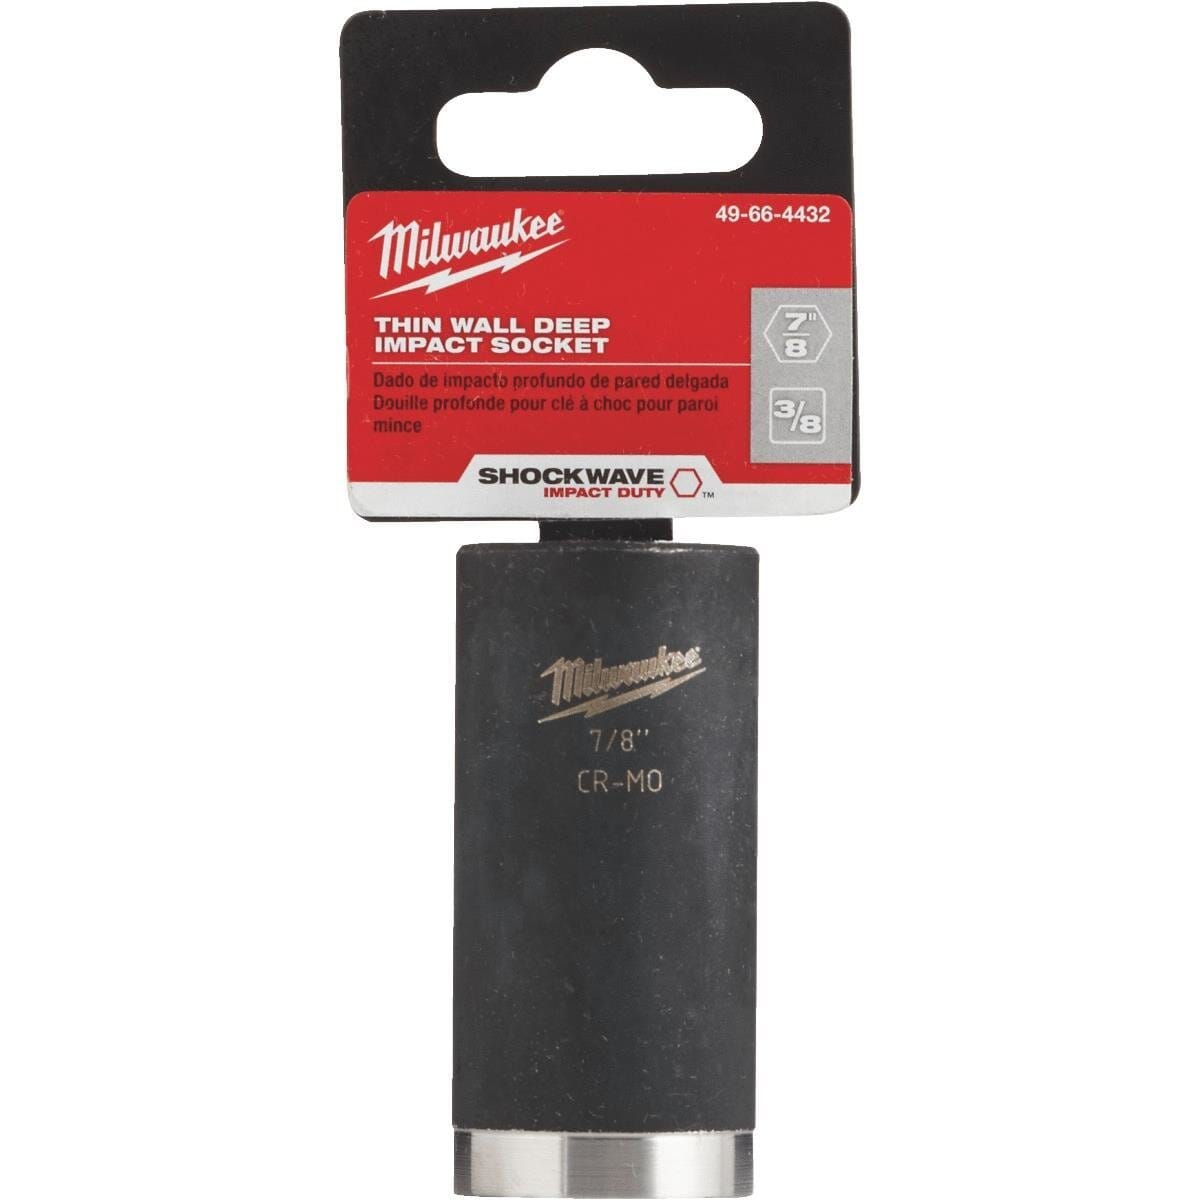 Milwaukee® SHOCKWAVE™ 49-66-4462 Deep Well Thinwall Impact Socket, 1/2 in Square Drive, 7/16 in Impact Socket, 6 Points